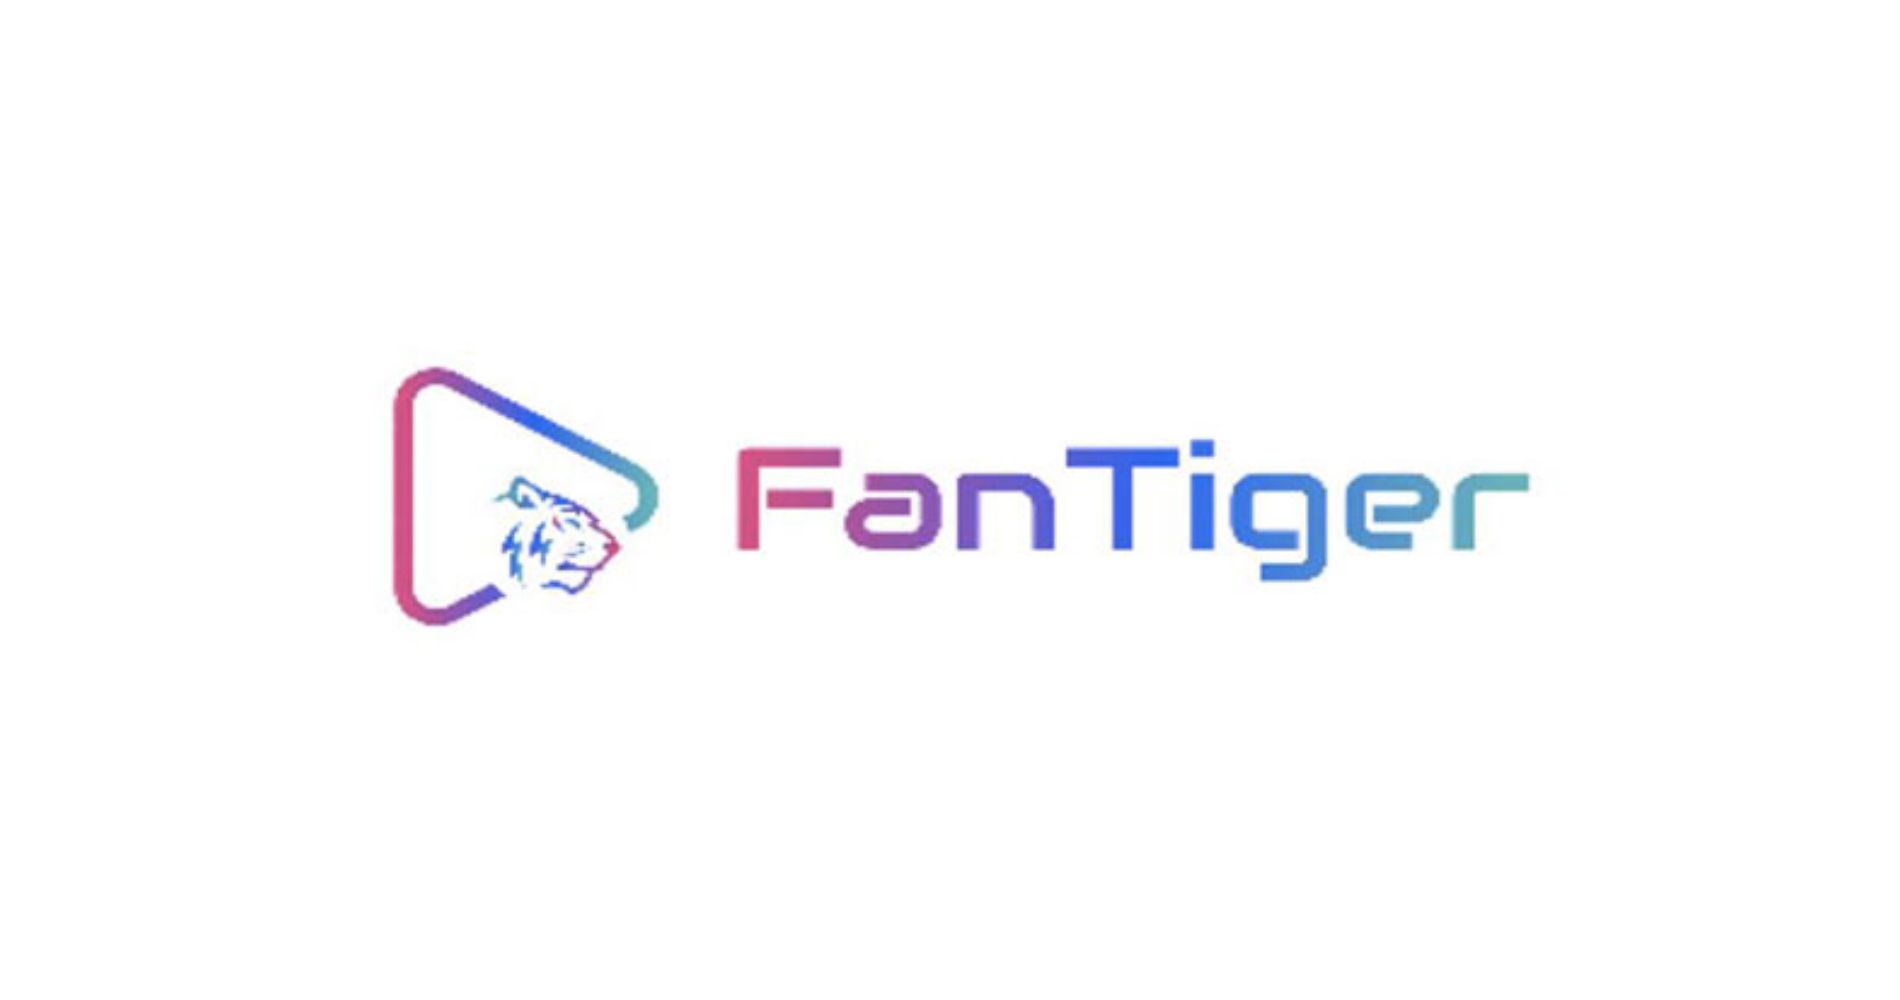 FanTiger becomes the first  NFT platform By crossing 50K transactions